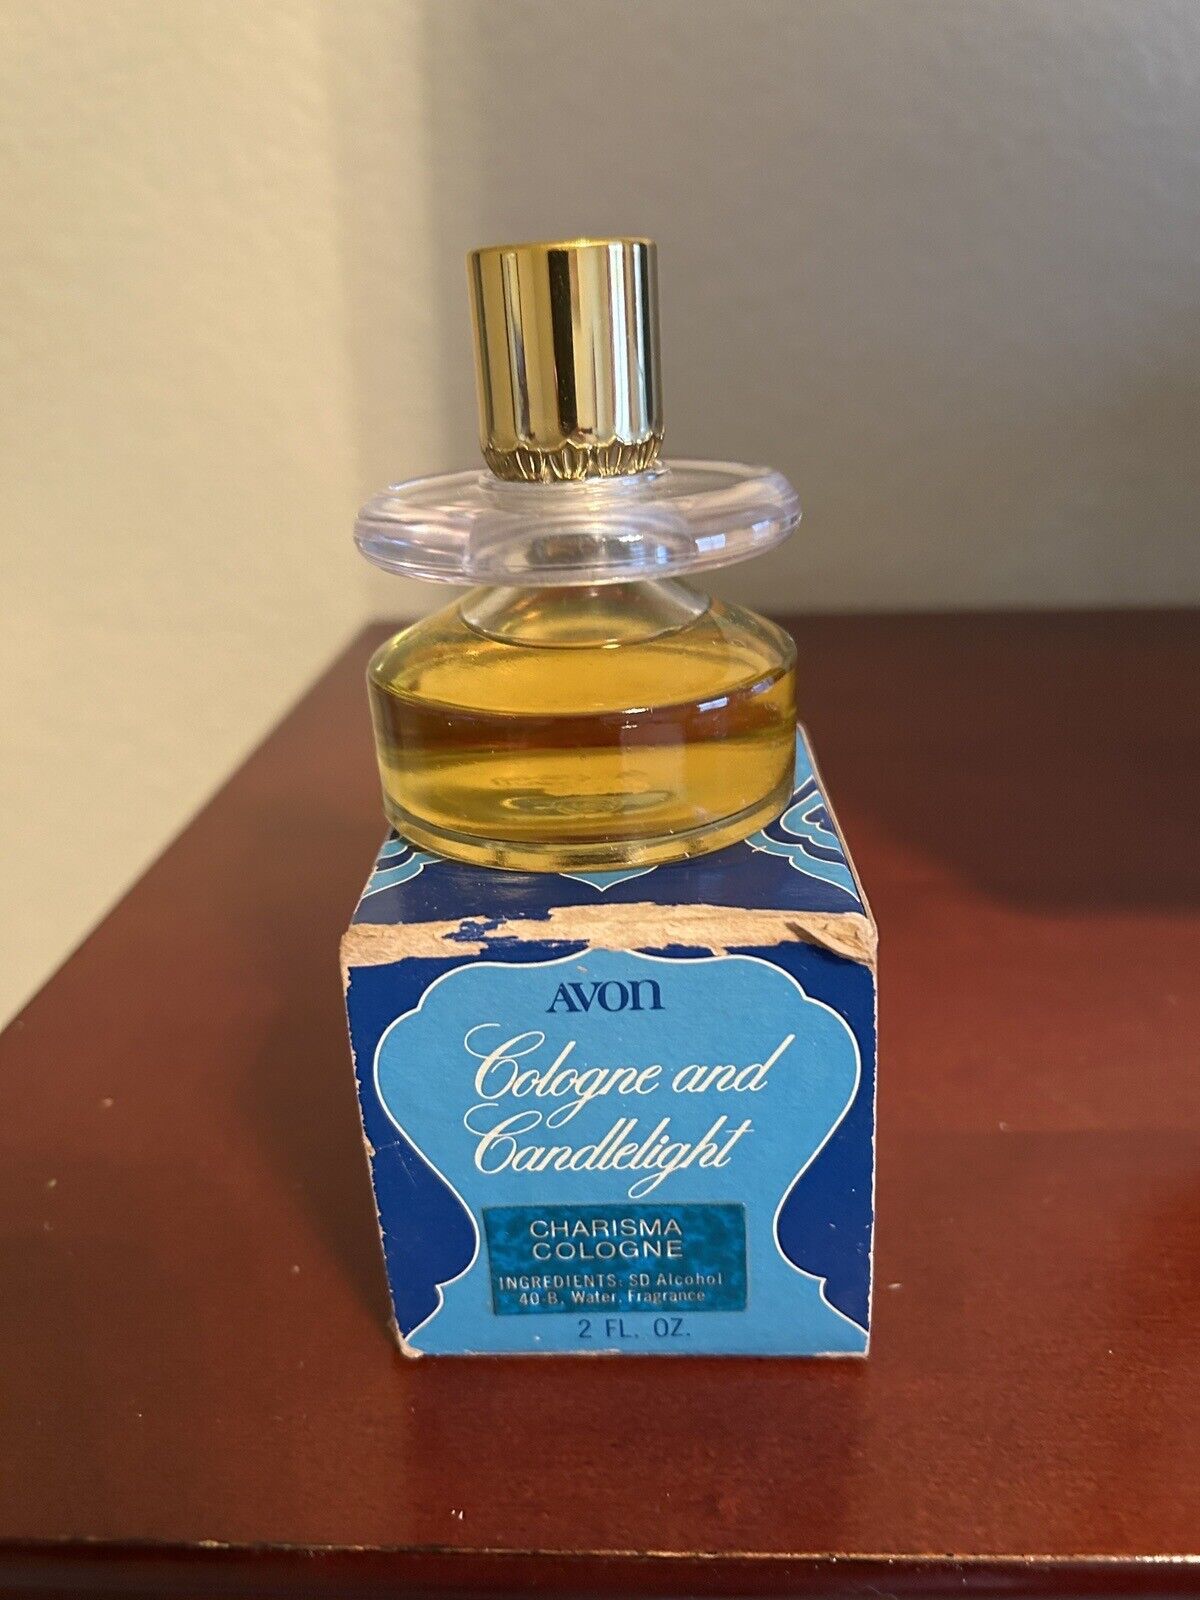 Avon Cologne and Candlelight bottle - Charisma cologne - 1975